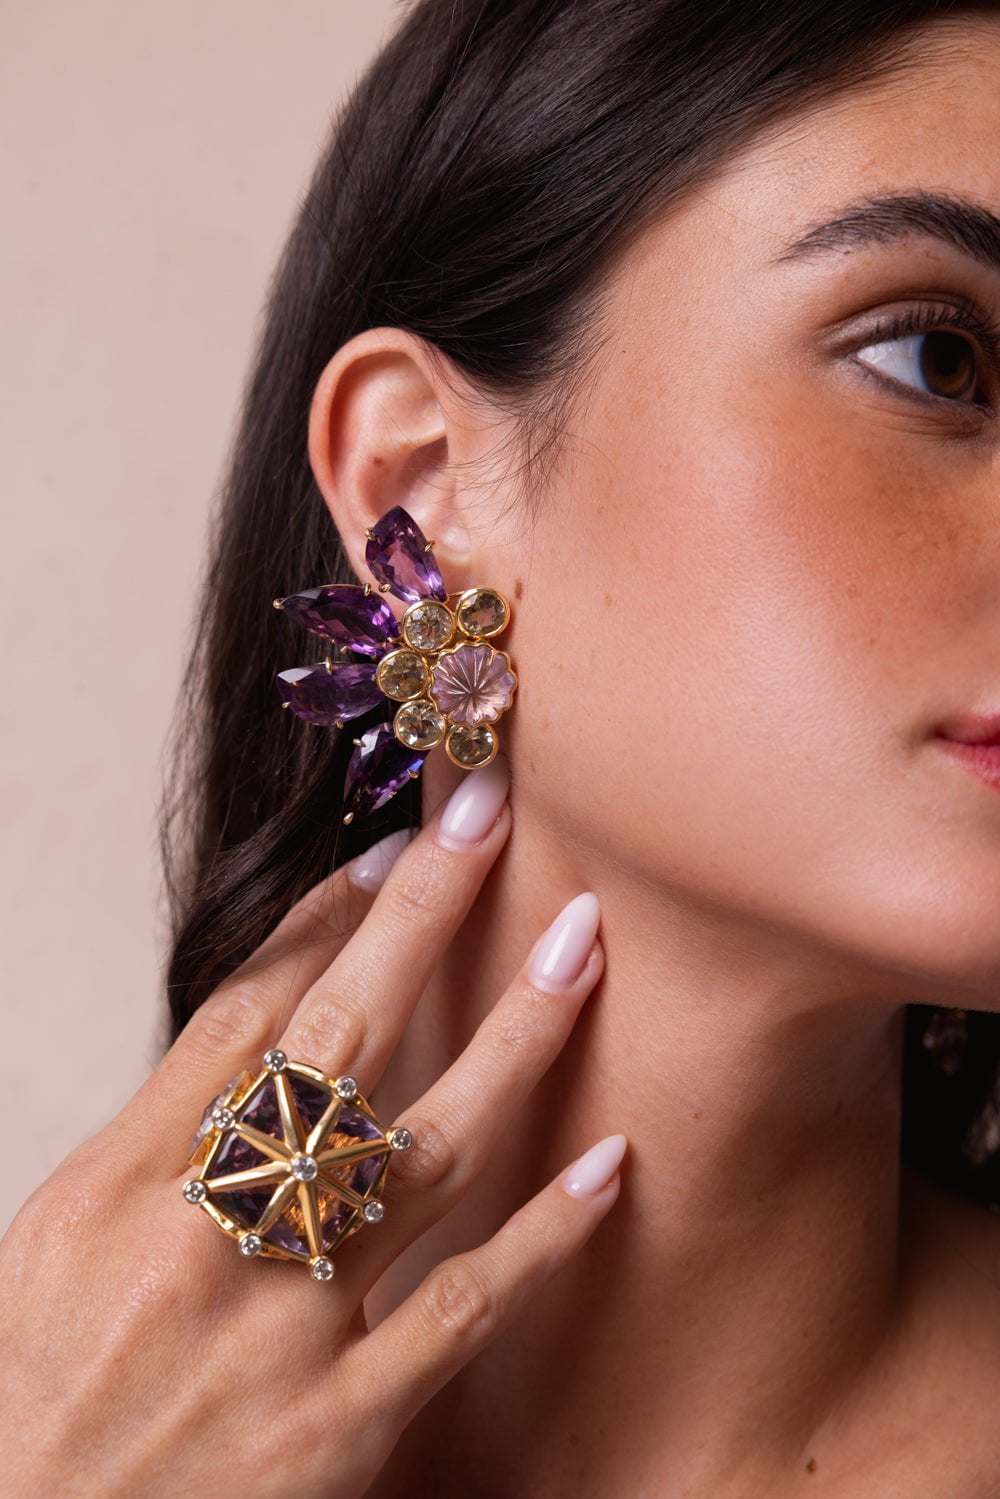 TONY DUQUETTE-Amethyst Citrine Earrings-YELLOW GOLD